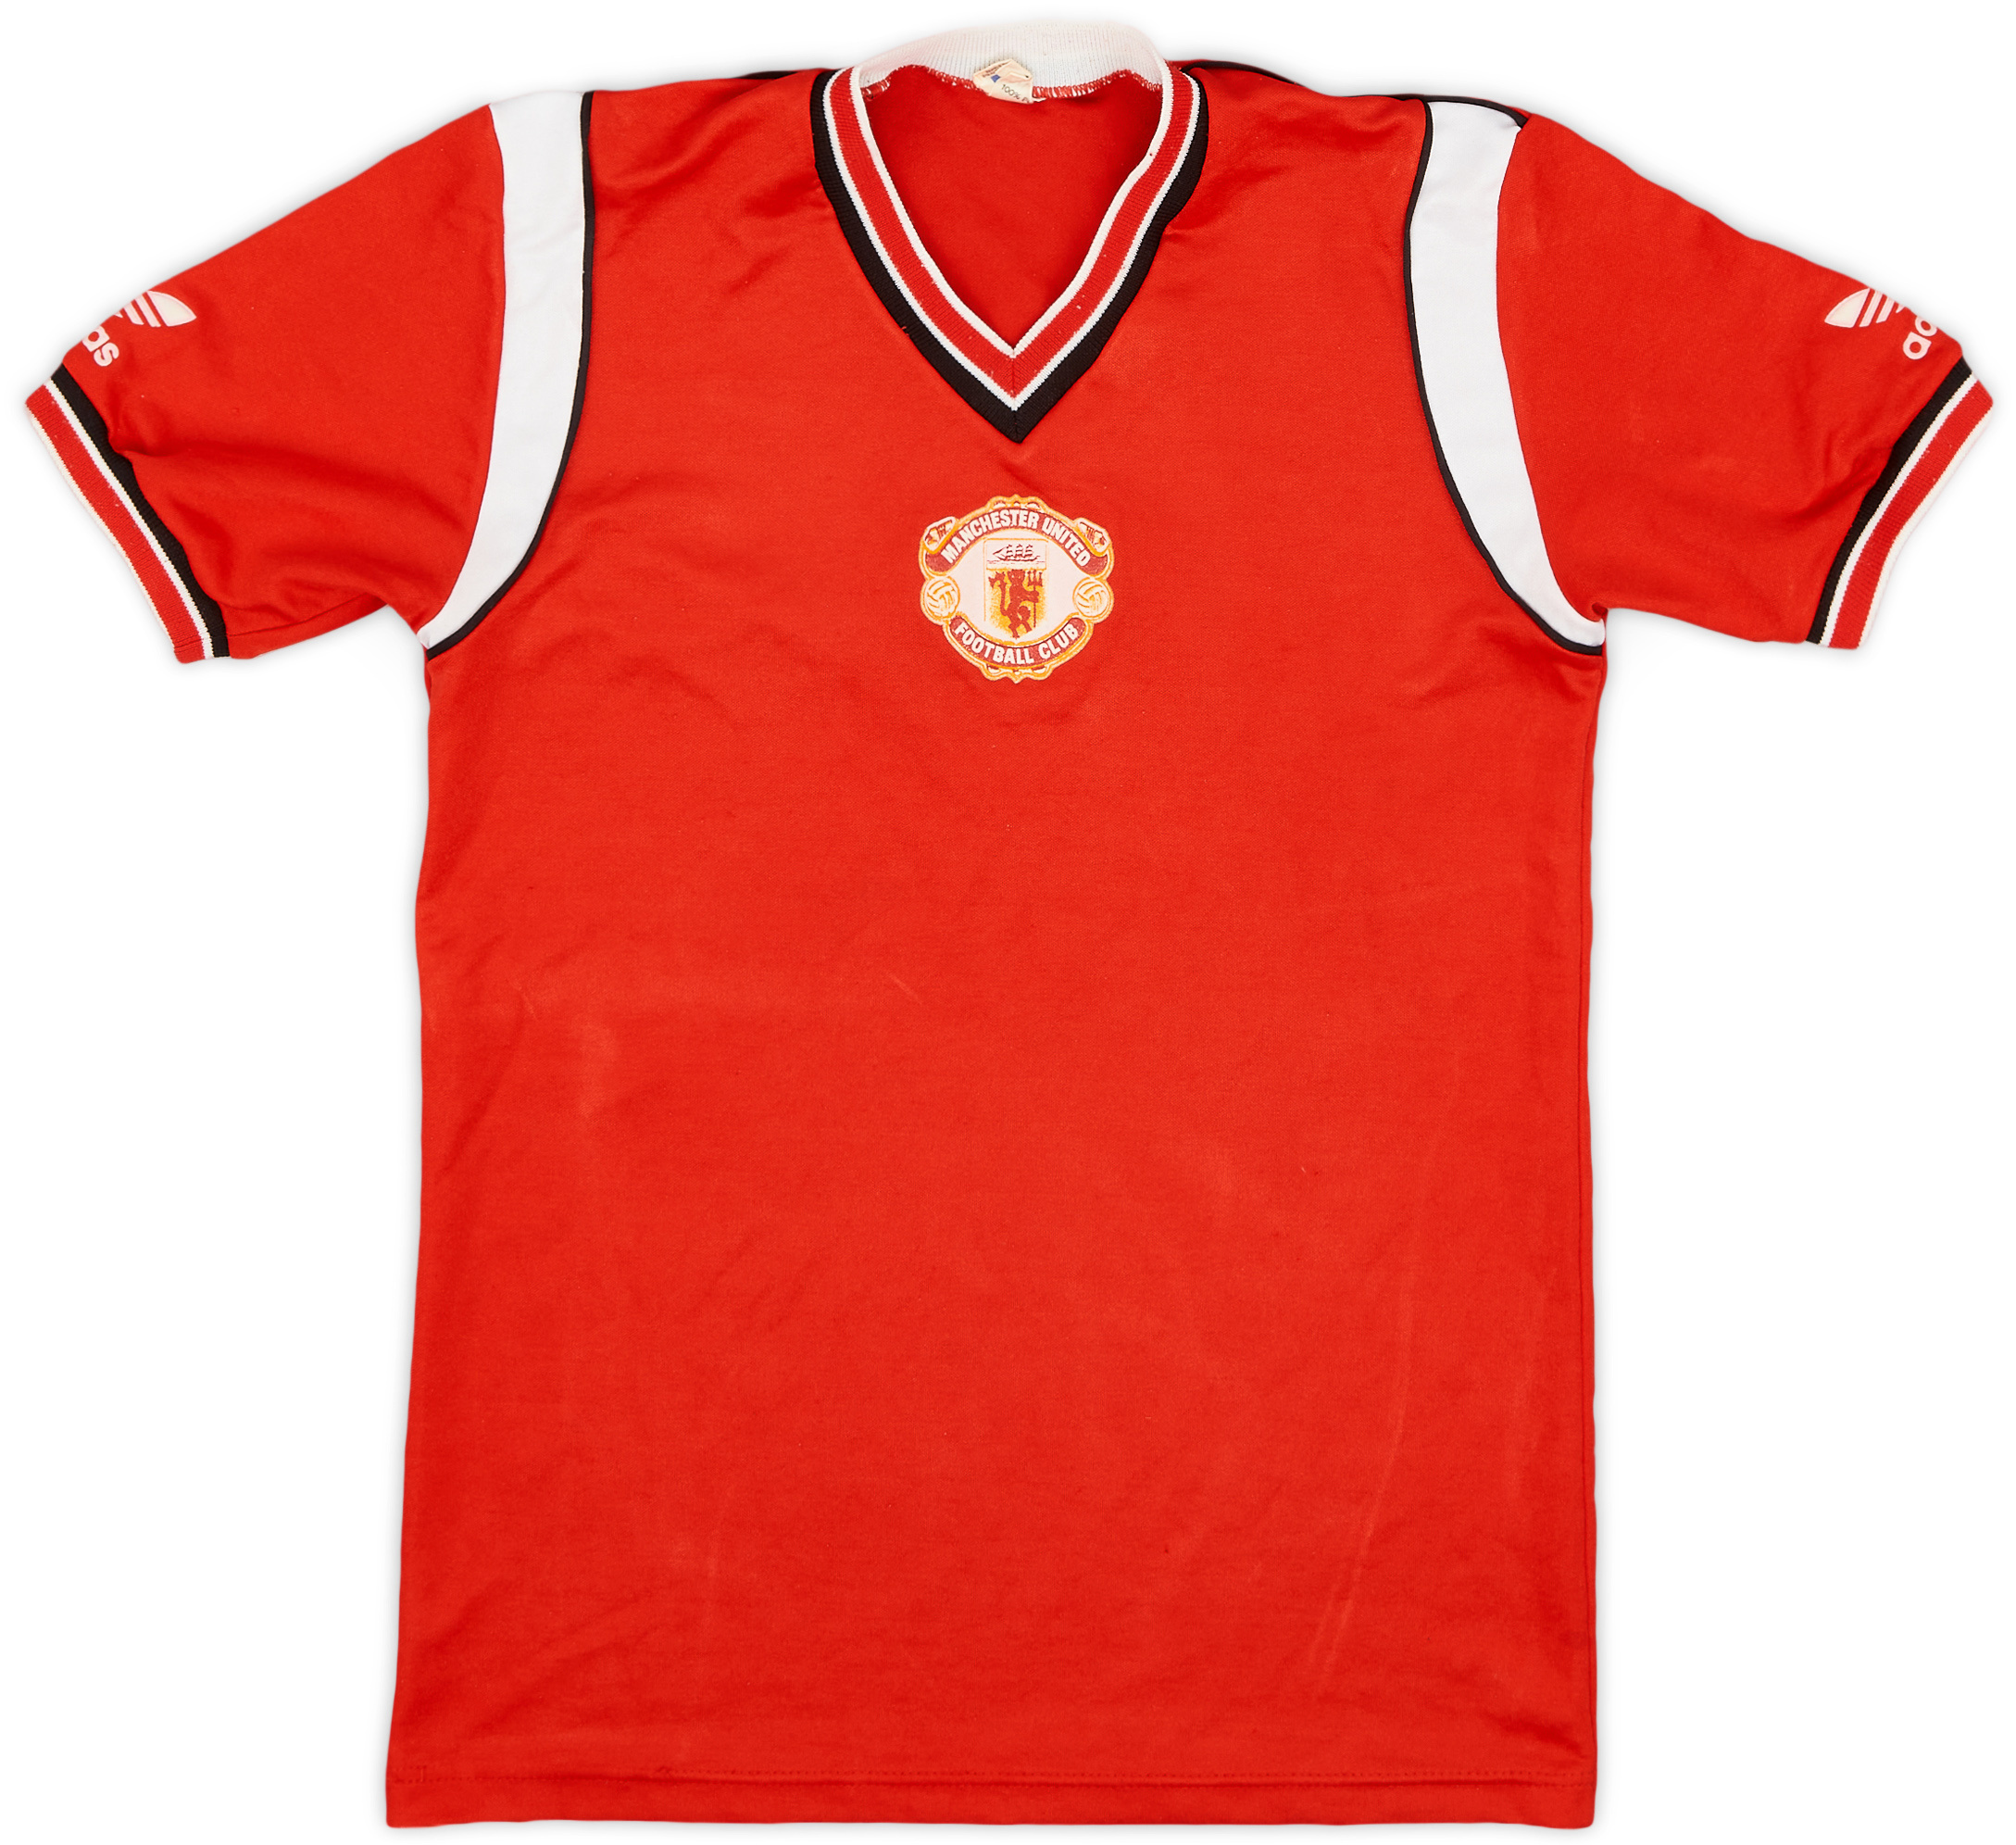 1984-86 Manchester United Home Shirt - 8/10 - ()